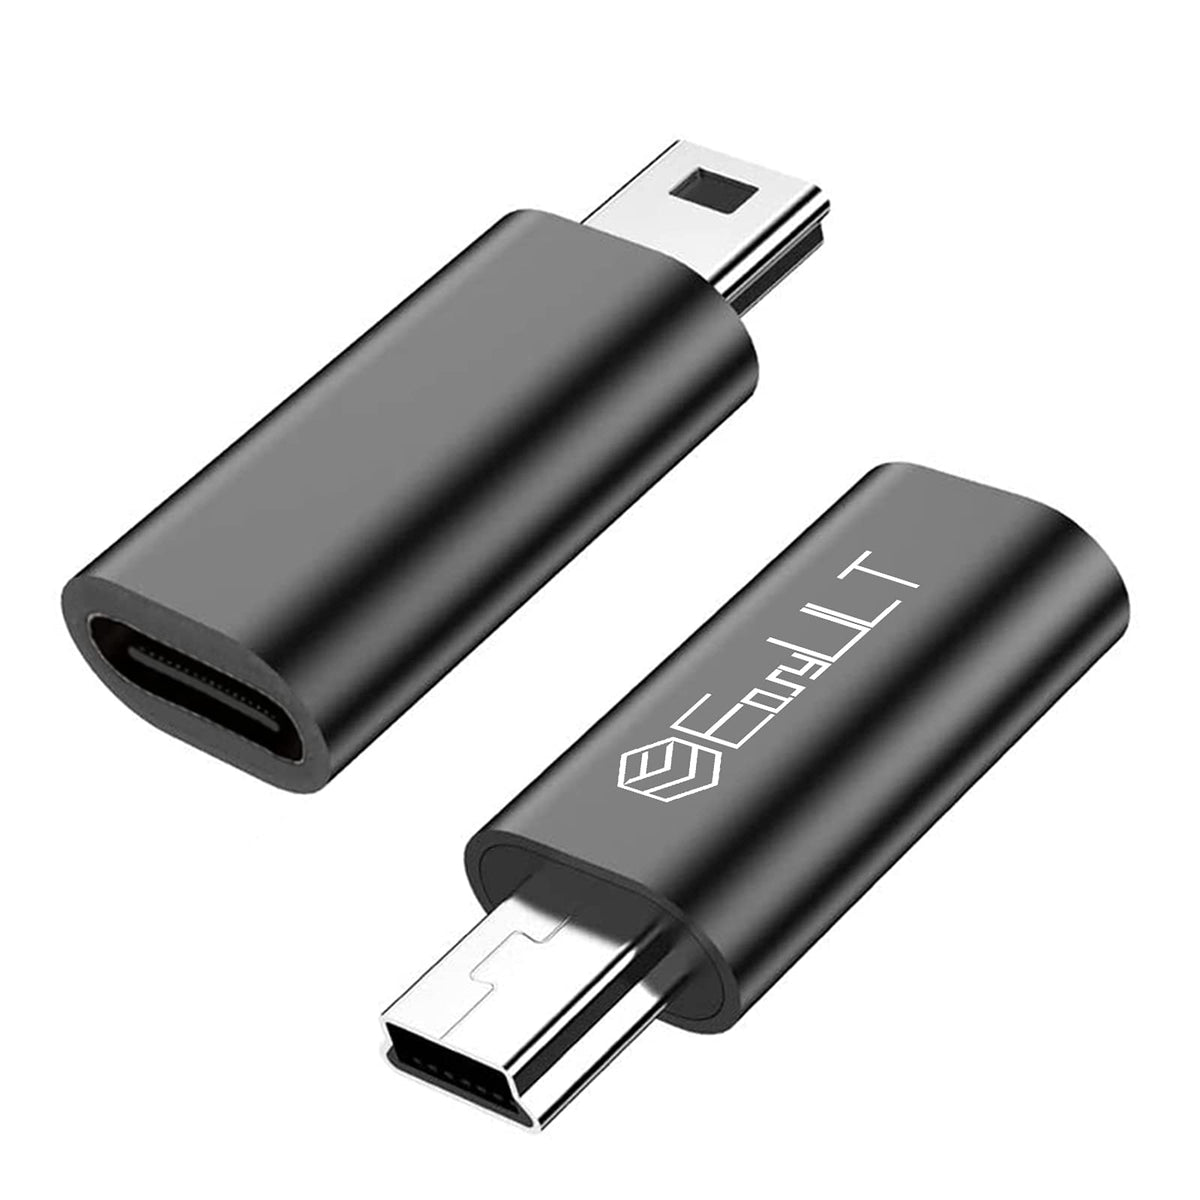 EasyULT USB C to Mini USB 2.0 Adapter 2 Pack, Mini USB to USB C Adapter for Connecting Compatible Laptops/Tablets, MP3 Players, Digital Cameras etc. (Black)